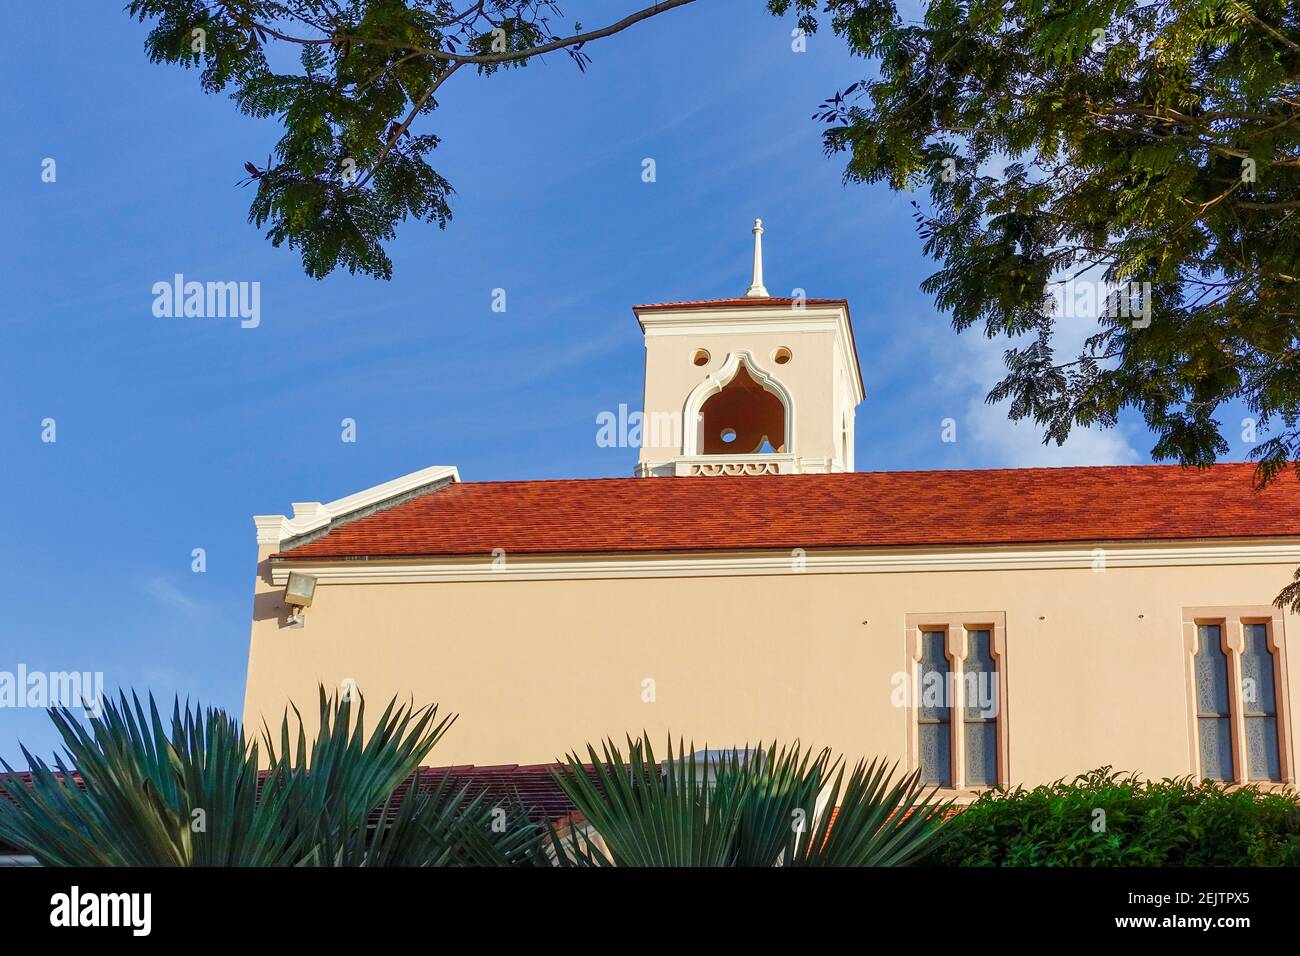 The Spanish style architecture of the First United Methodist Church of Coral Gables in Florida. Stock Photo